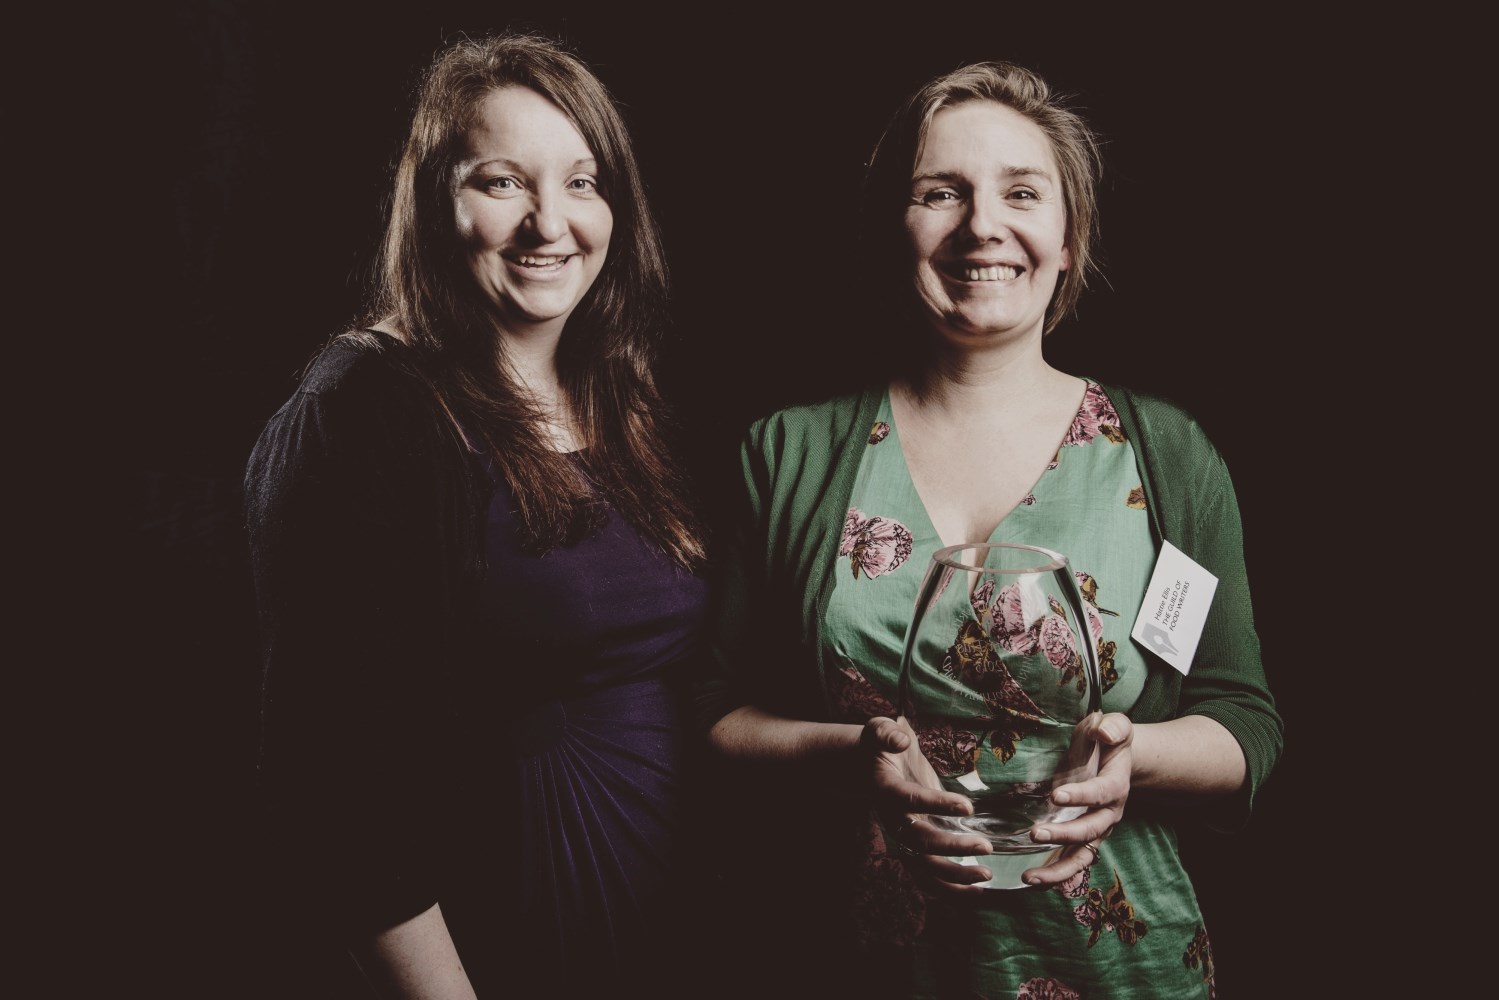 From left to right: Heather Middleton from Fish is the Dish by Seafish (sponsors of the Miriam Polunin Award for Work on Healthy Eating) and Hattie Ellis (winner of the Miriam Polunin Award for Work on Healthy Eating and the Food Book of the Year Award)